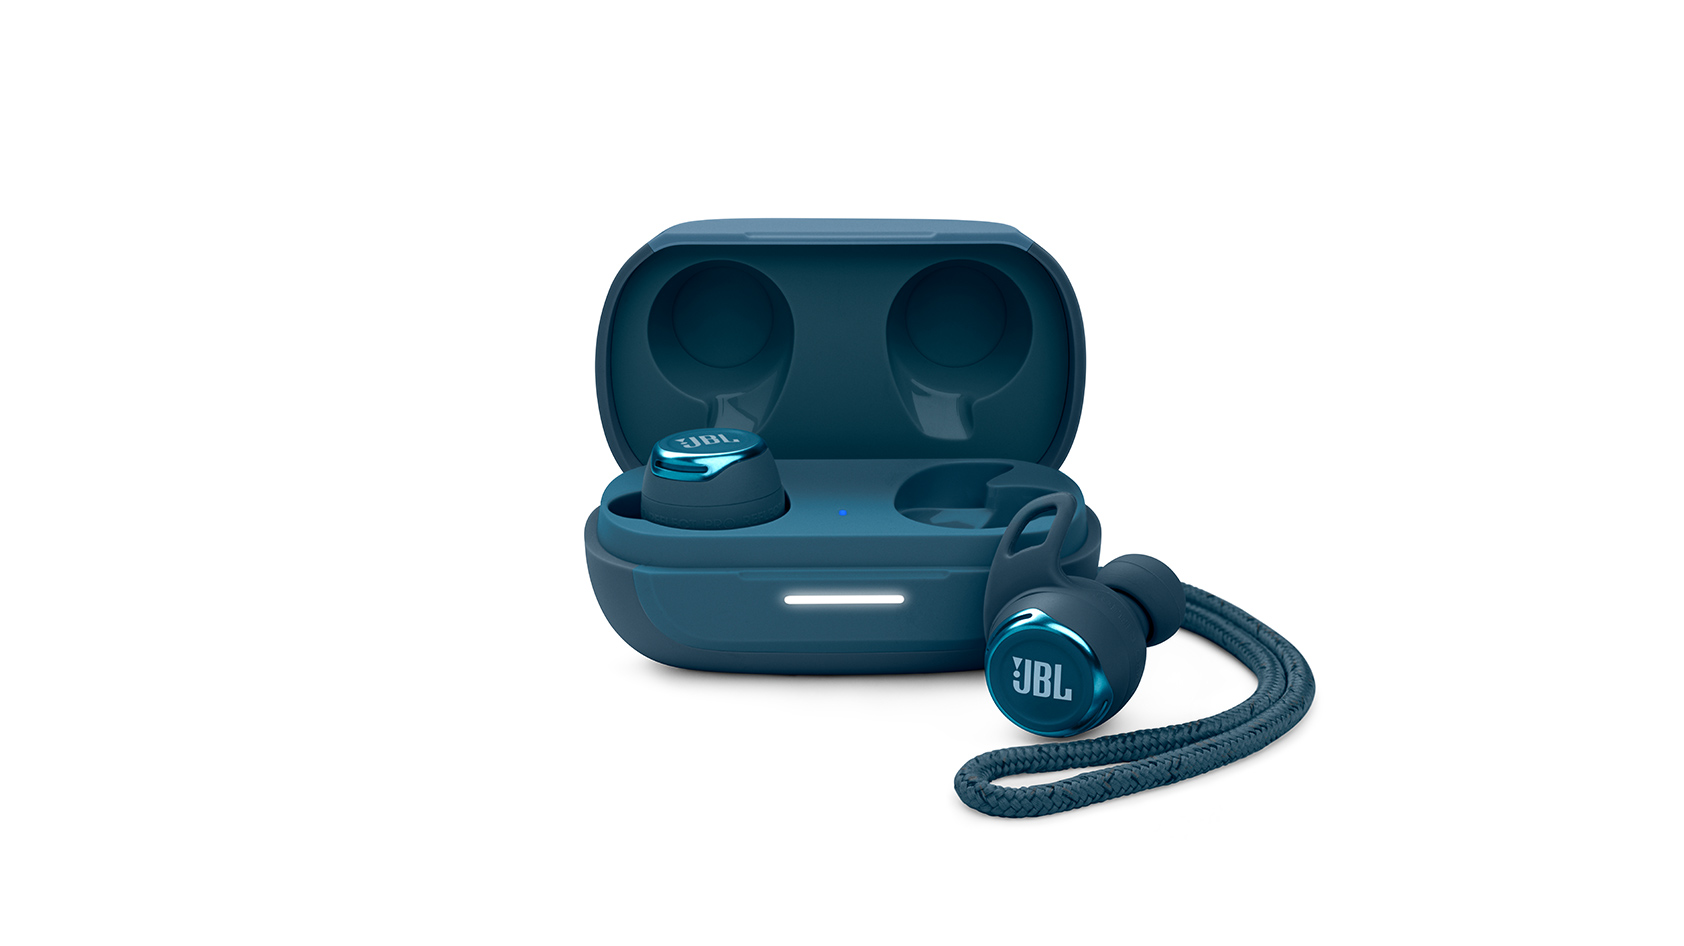 The jbl reflect flow pro true wireless earbuds in blue against a white background.